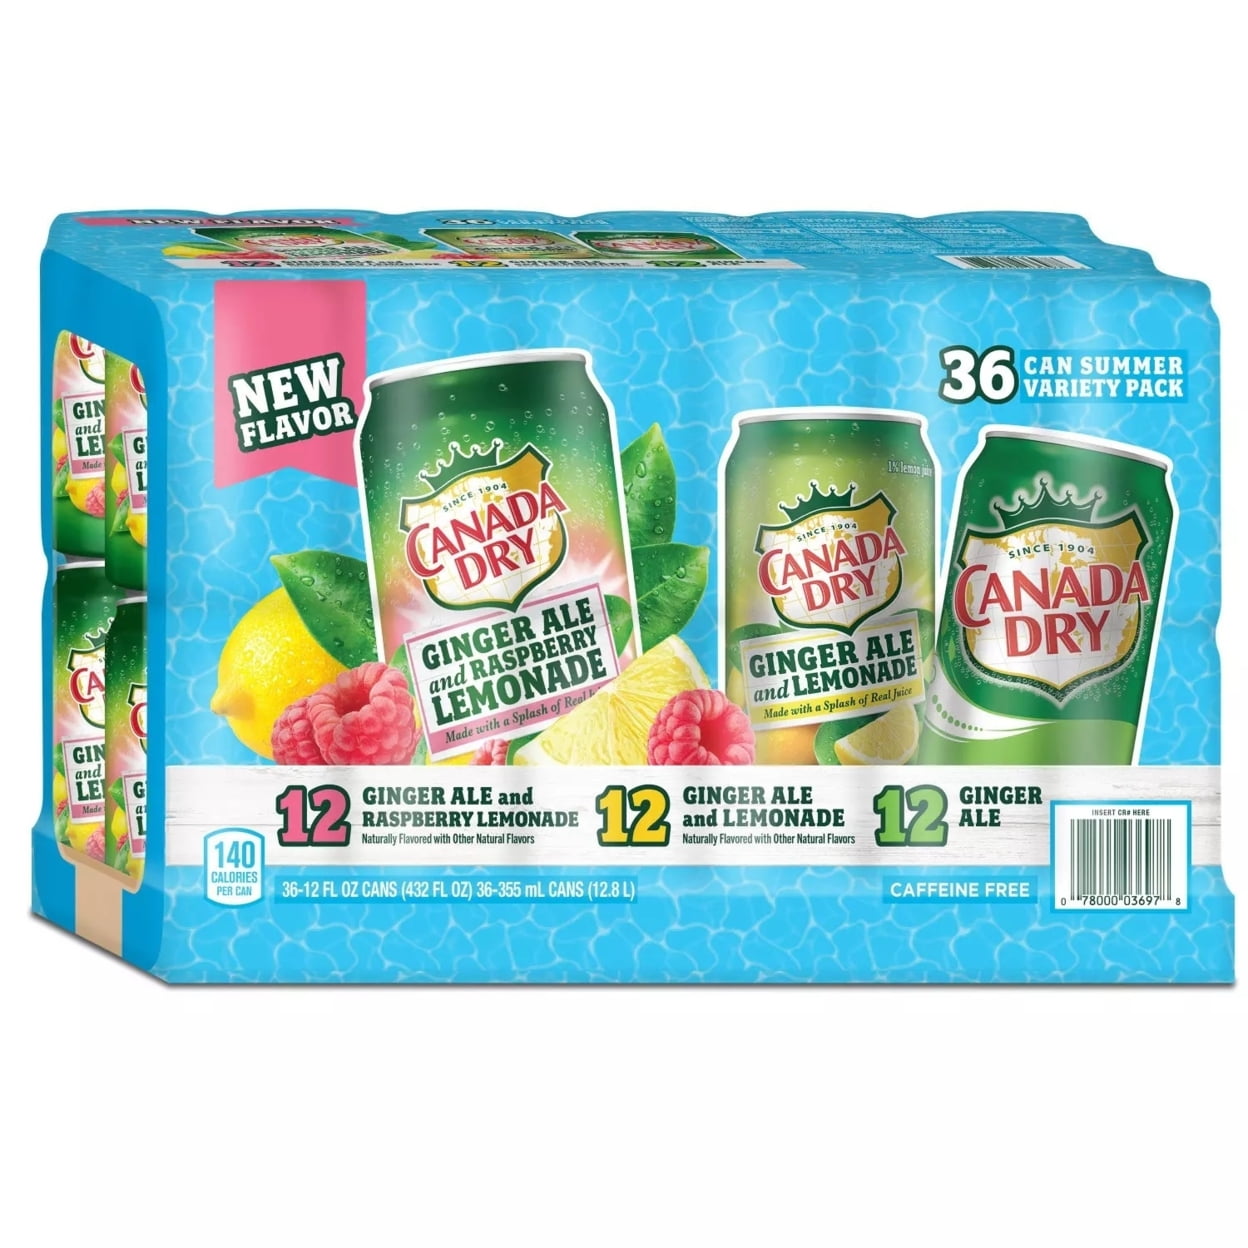 Canada Dry Winter Variety Pack, 12 Ounce (36 Pack) in Saudi Arabia